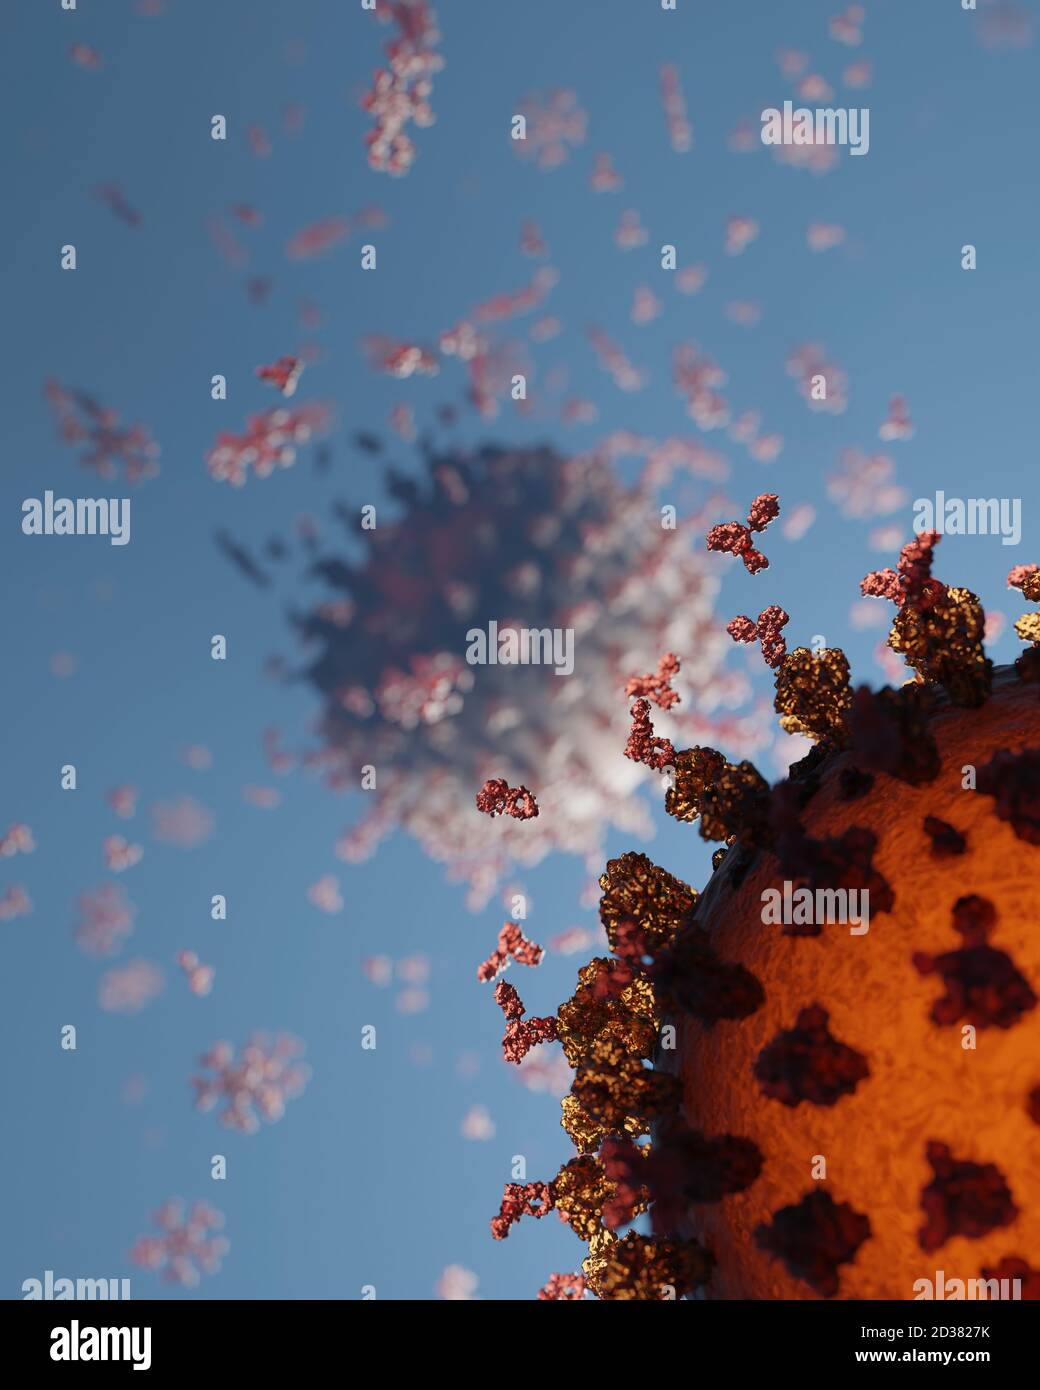 Human antibodies (igG and igM) attacking a Corona virus (SARS-CoV-2, Covid 19). An accurate model based on scientific structural data from the PDB. Stock Photo